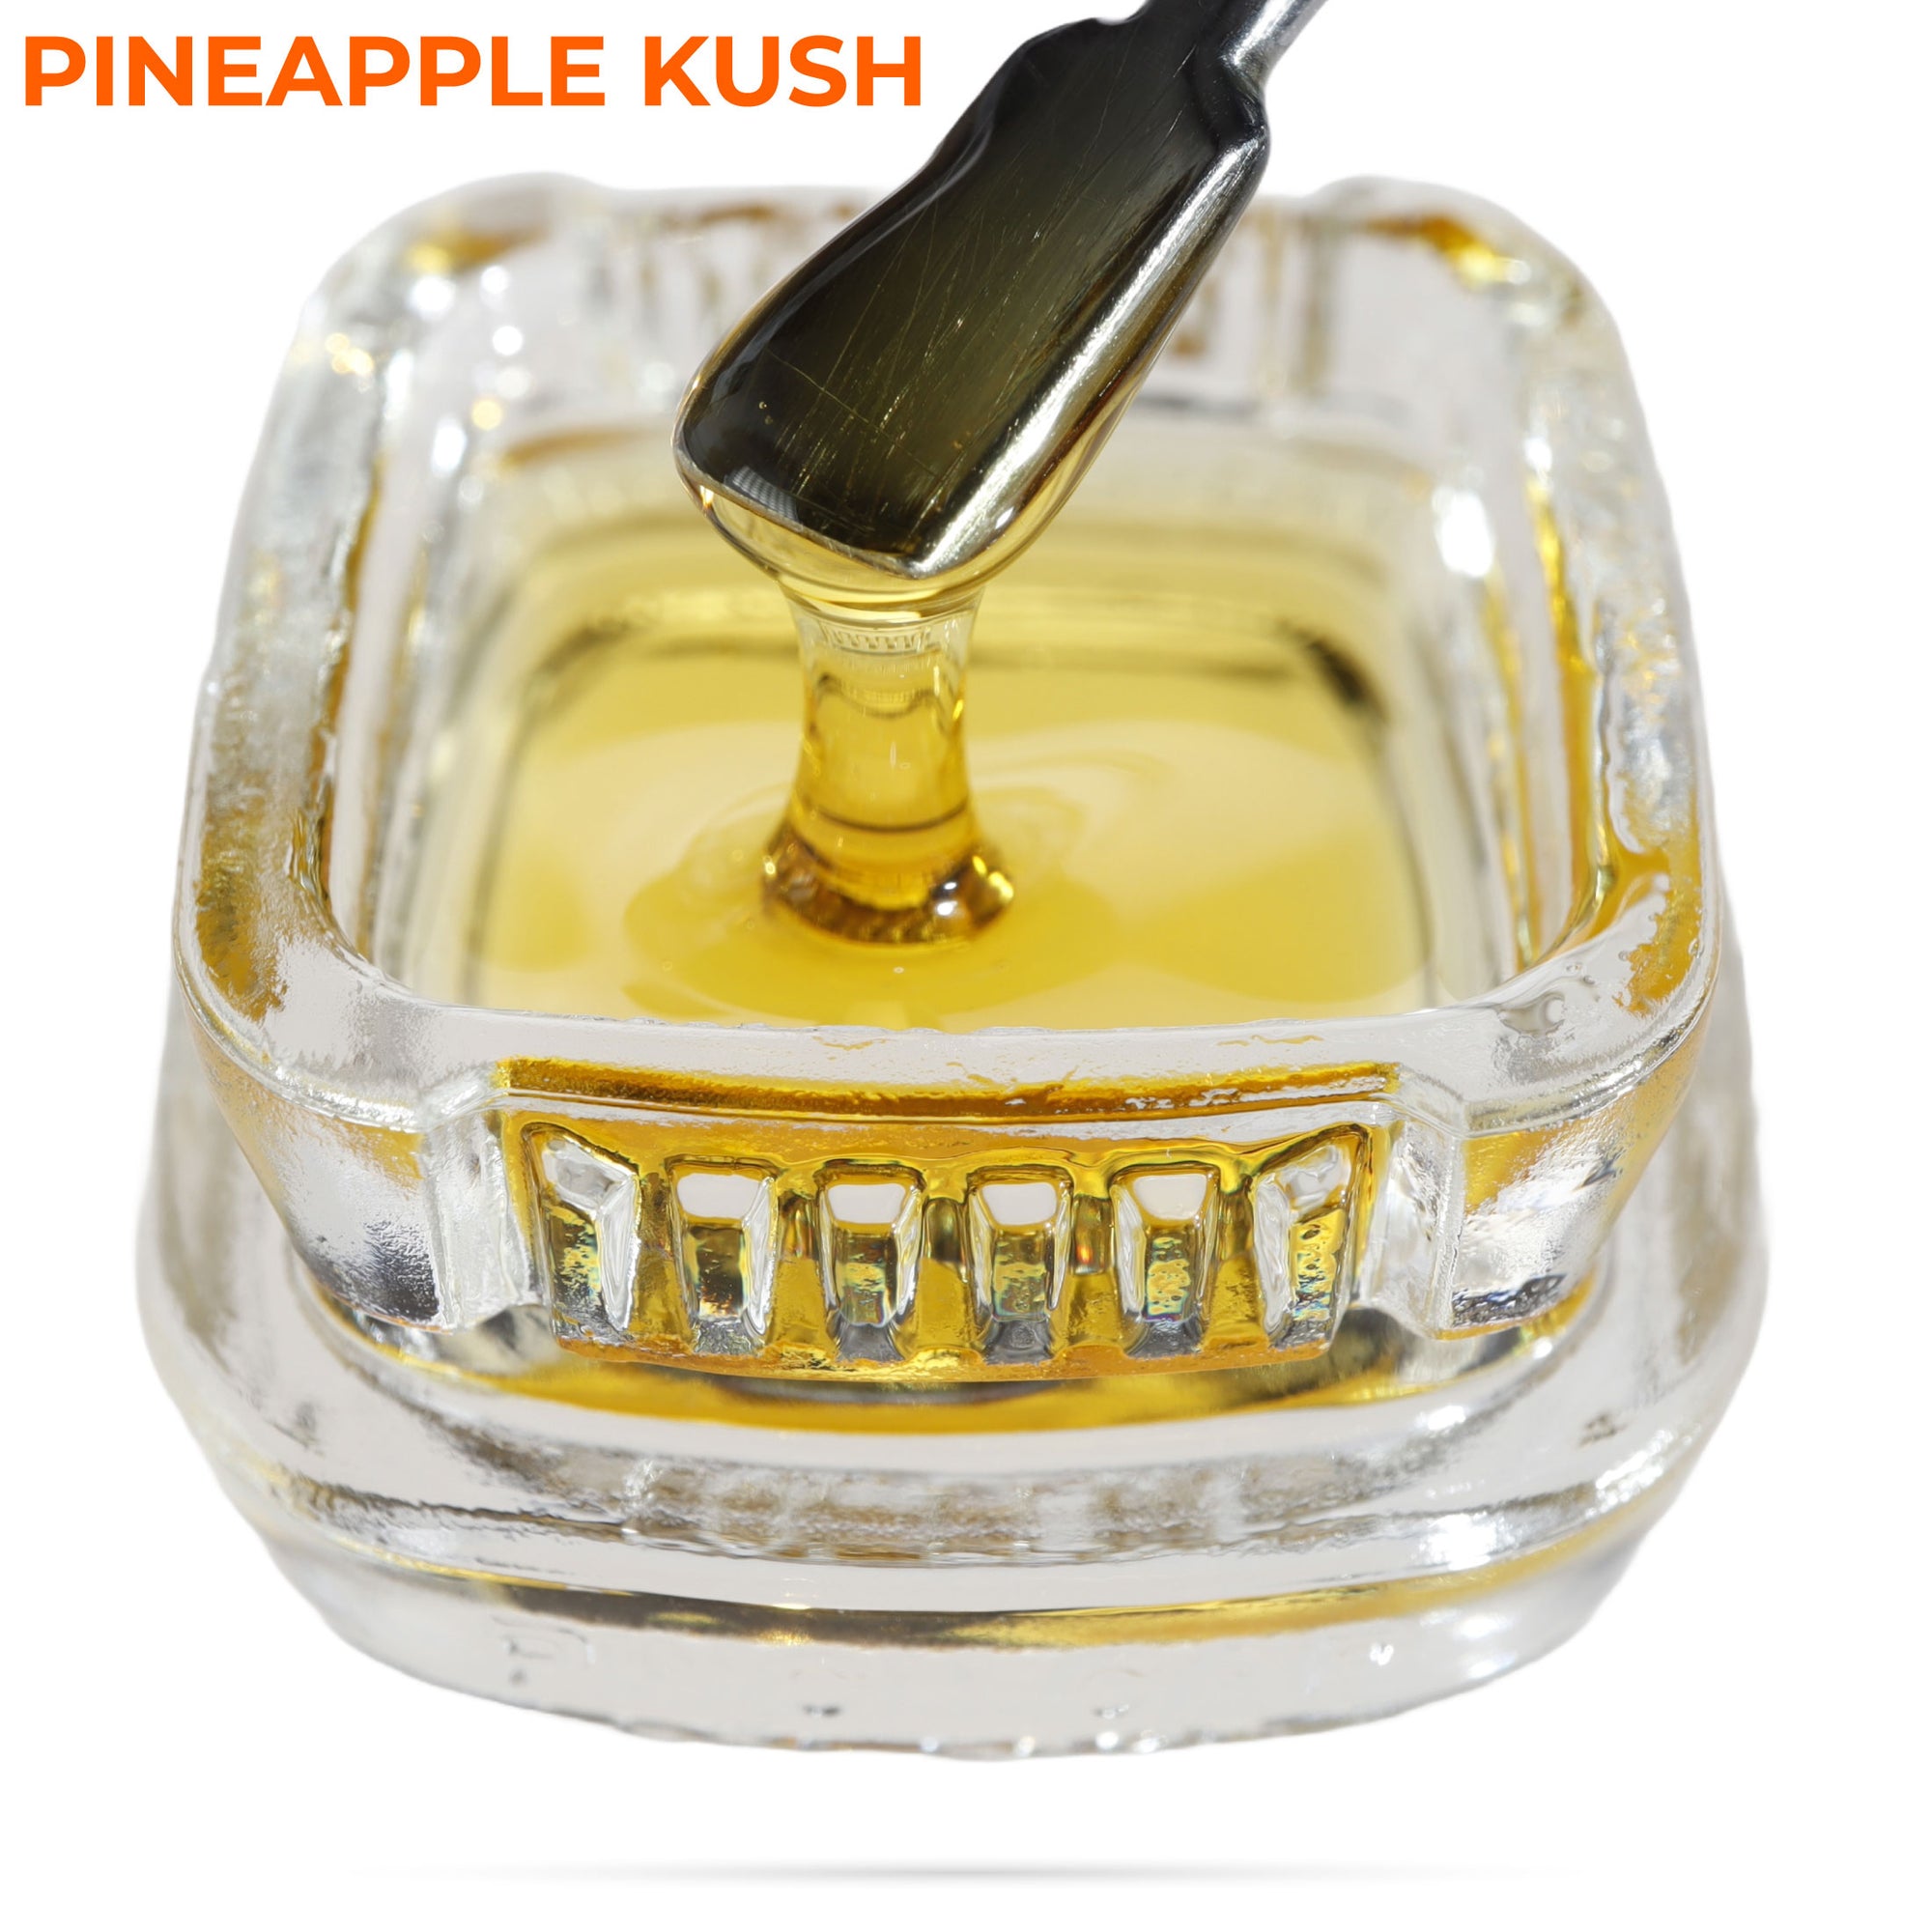 Image of Pineapple Kush CBD Live Resin dripping from a dab tool into a calyx container.